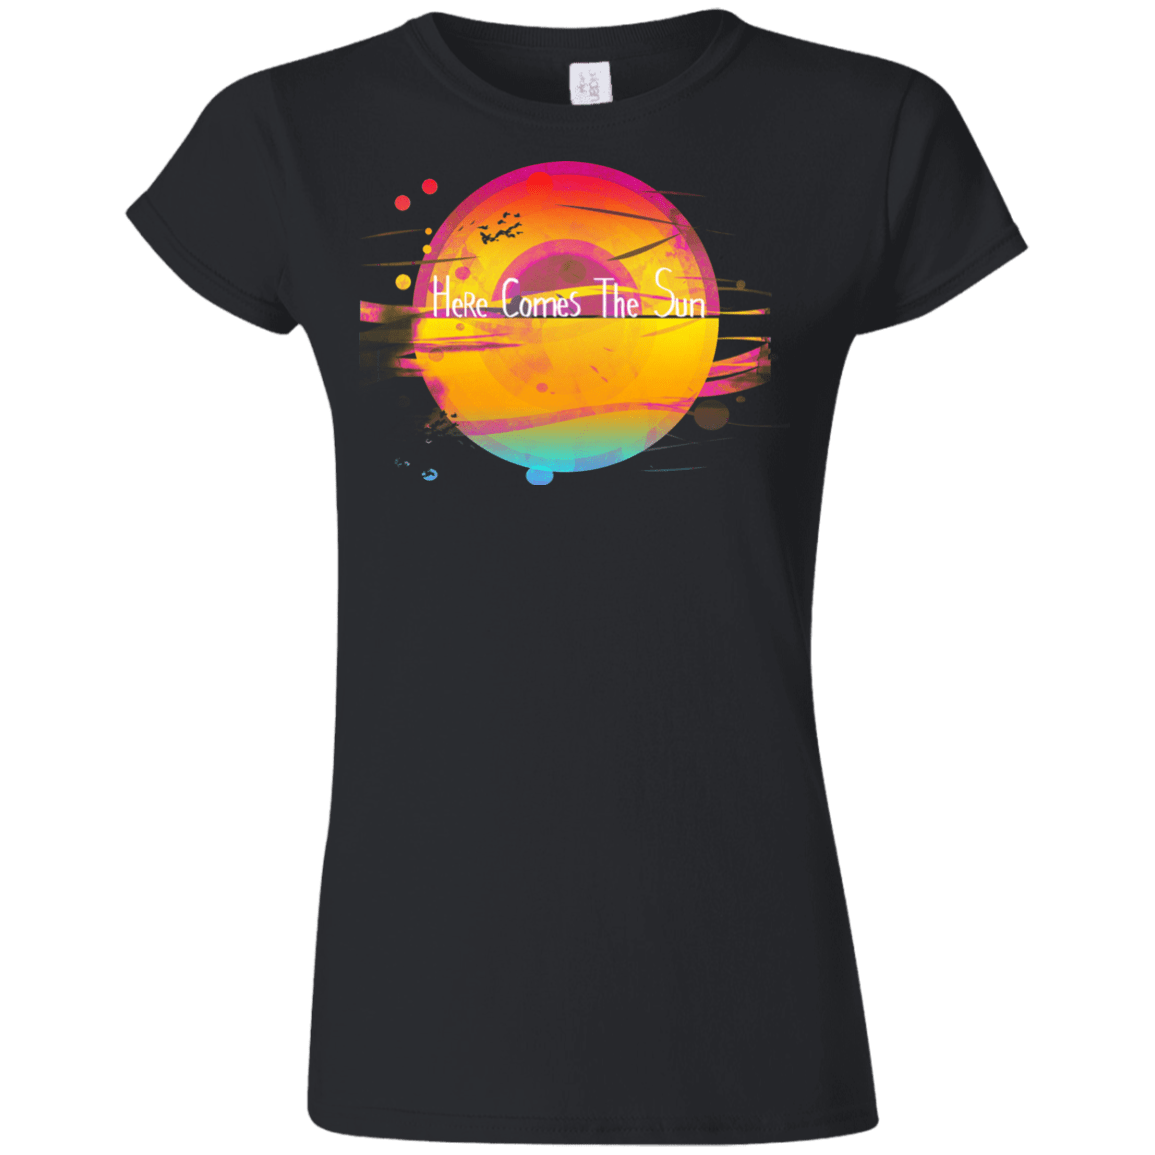 T-Shirts Black / S Here Comes The Sun (2) Junior Slimmer-Fit T-Shirt